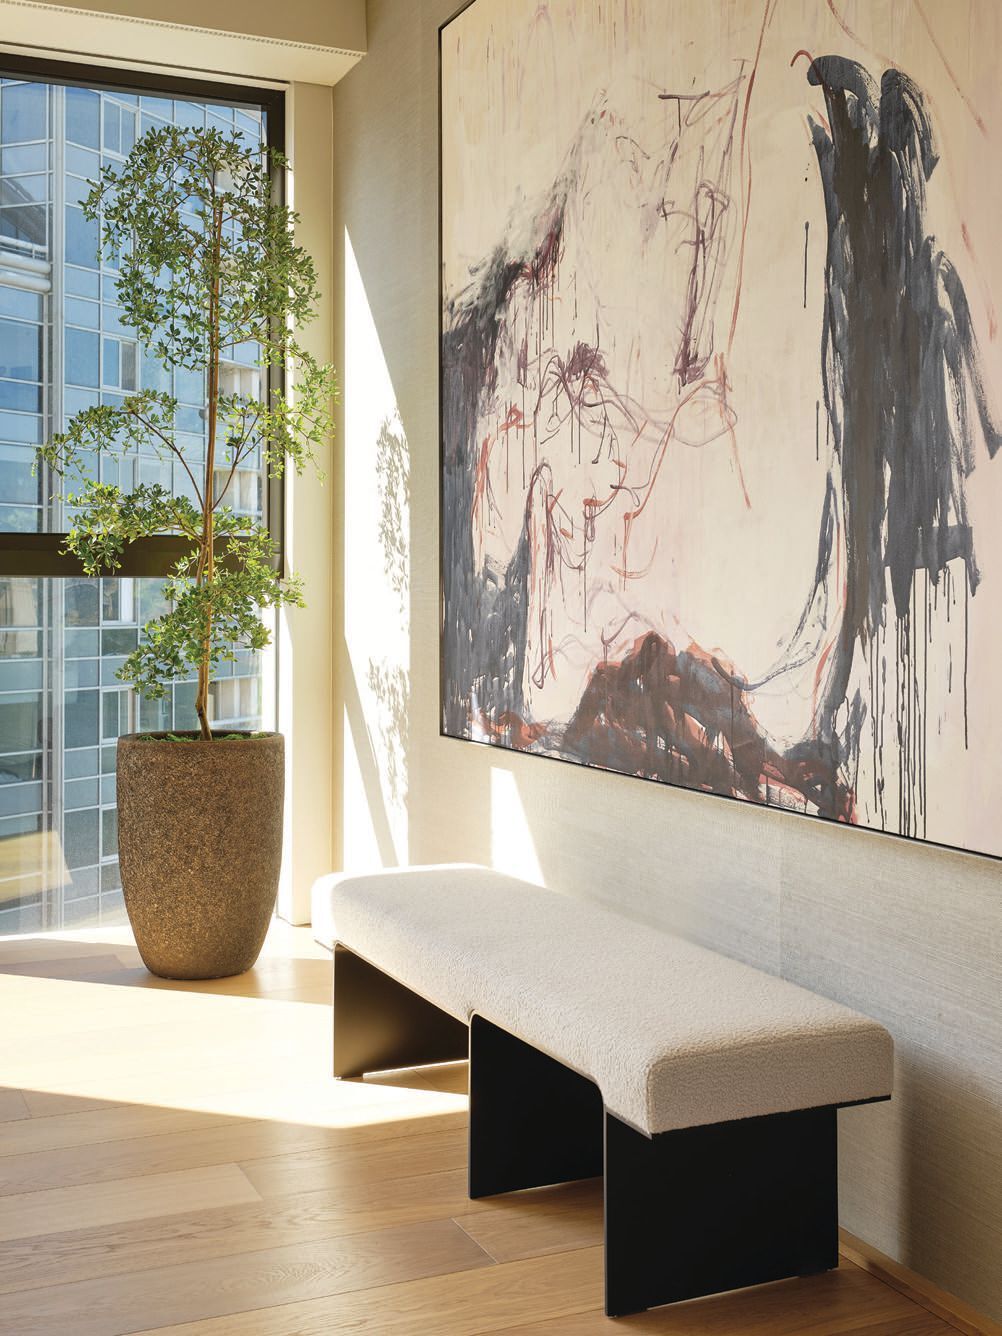 In addition to city views, an extensive art collection is a central theme of the home. PHOTOGRAPHED BY R. BRAD KNIPSTEIN